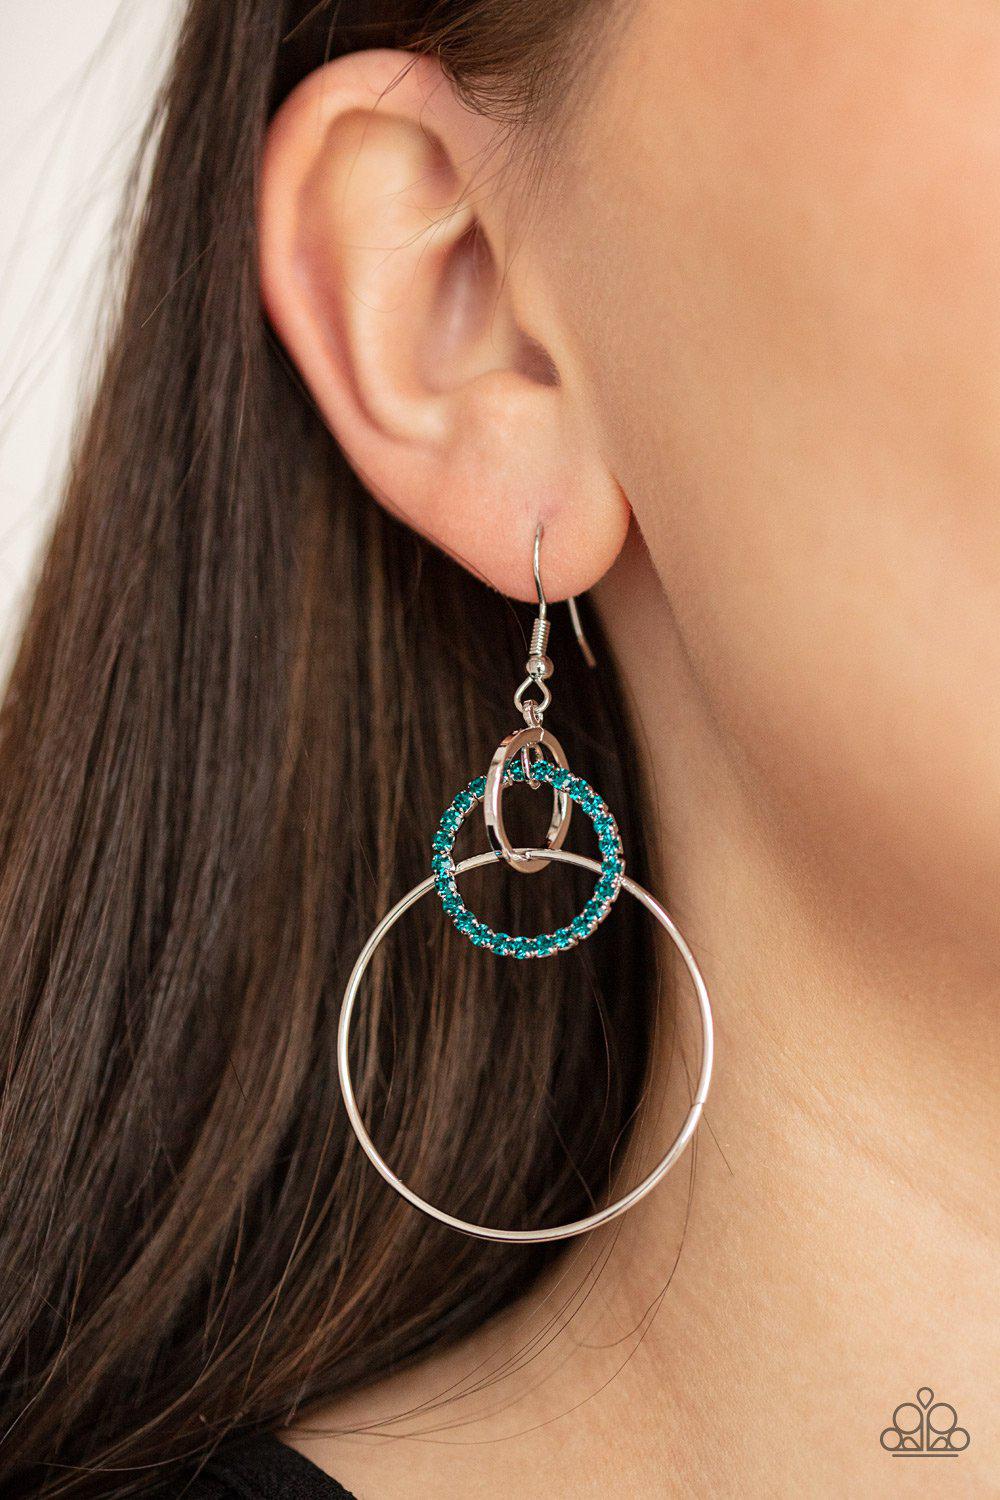 In An Orderly Fashion Blue Rhinestone and Silver Earrings - Paparazzi Accessories- lightbox - CarasShop.com - $5 Jewelry by Cara Jewels